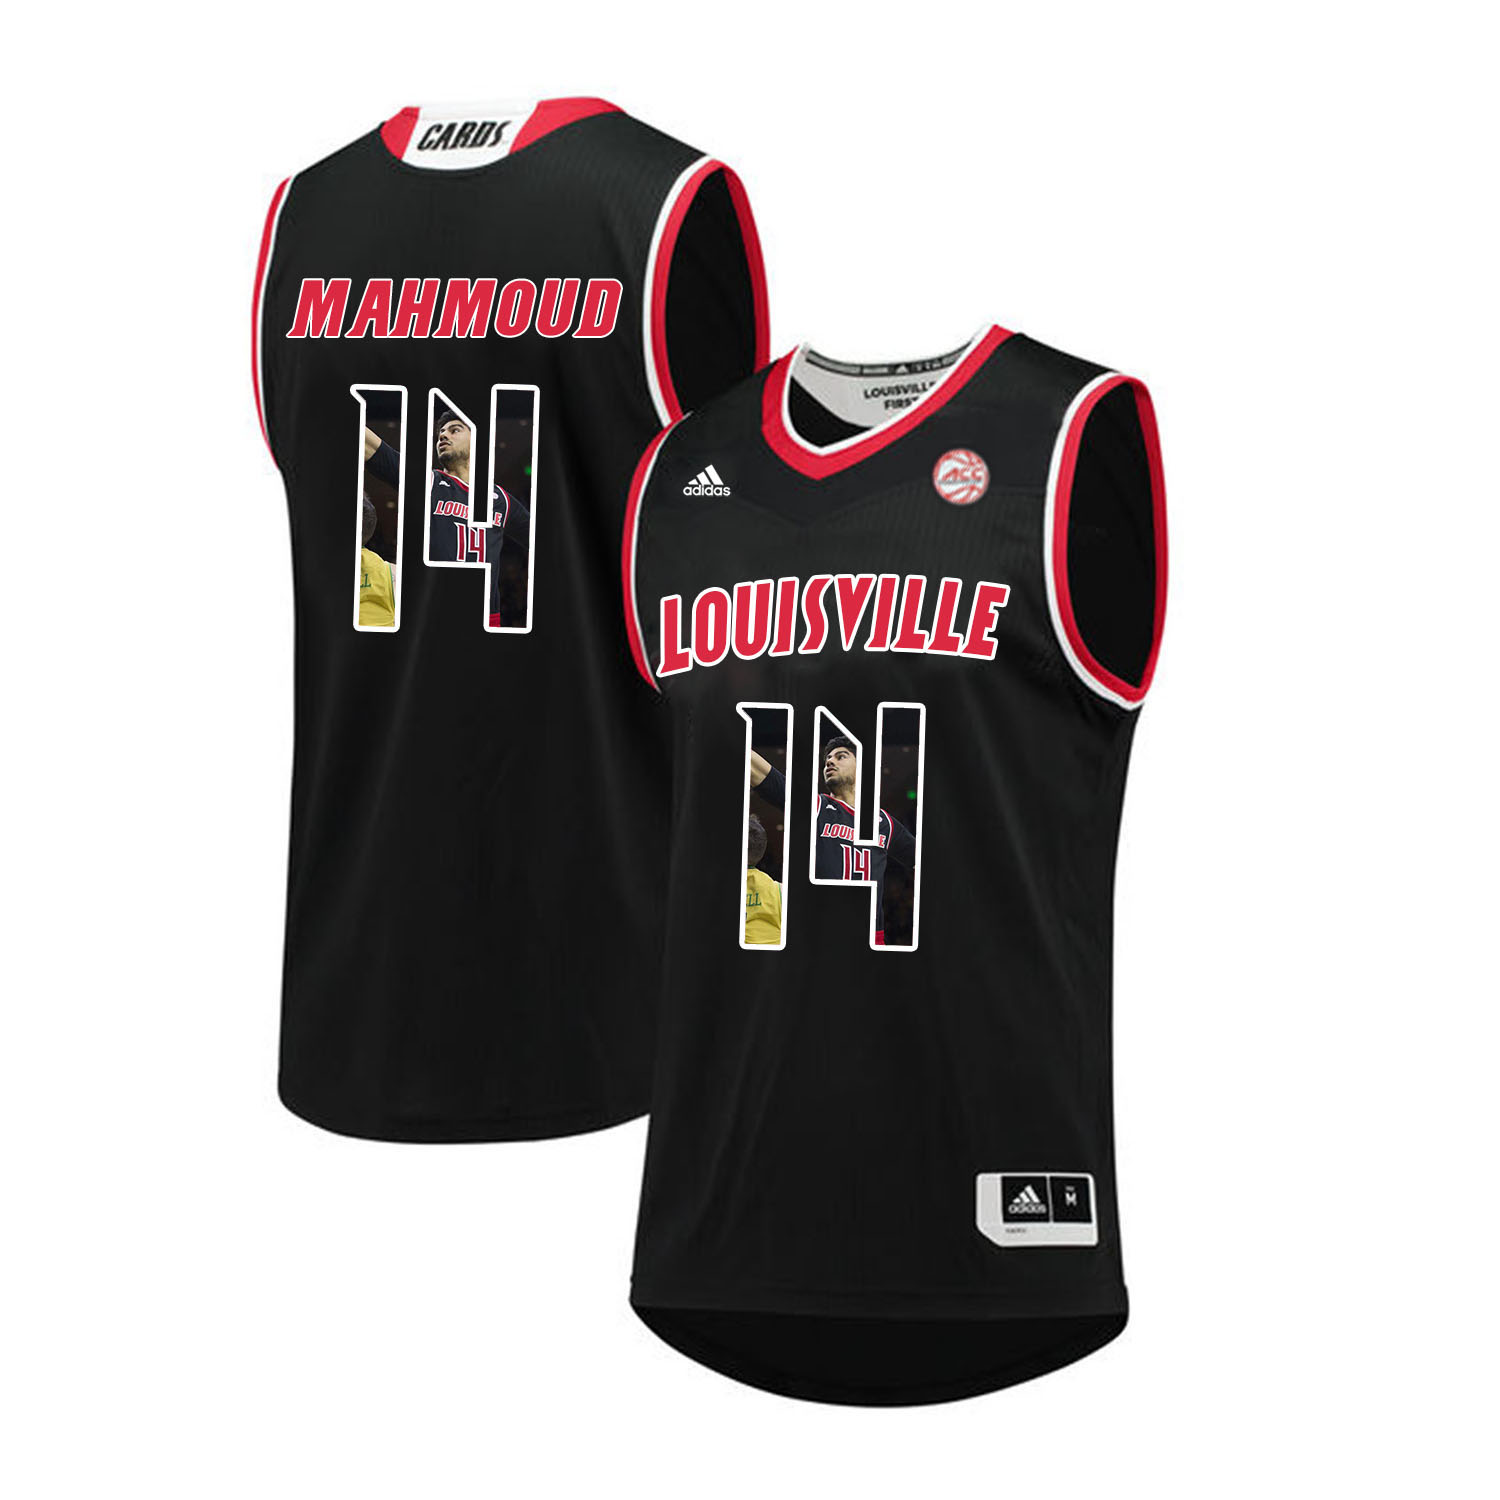 Louisville Cardinals 14 Anas Mahmoud Black With Portrait Print College Basketball Jersey